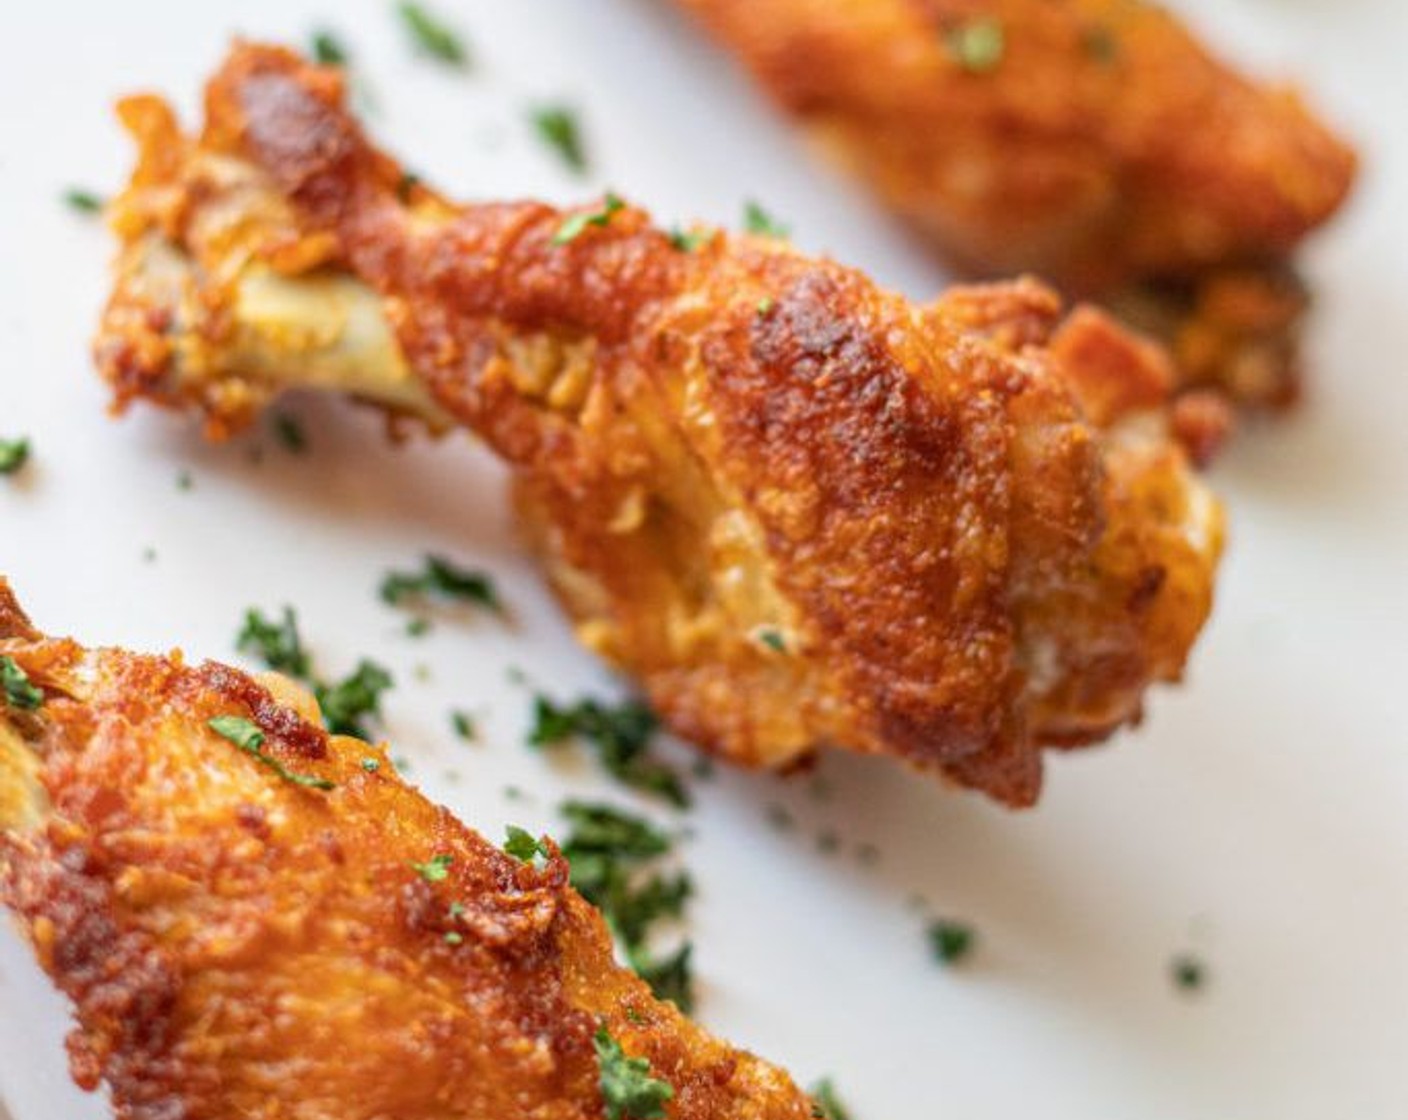 Dominican Fried Chicken Wings